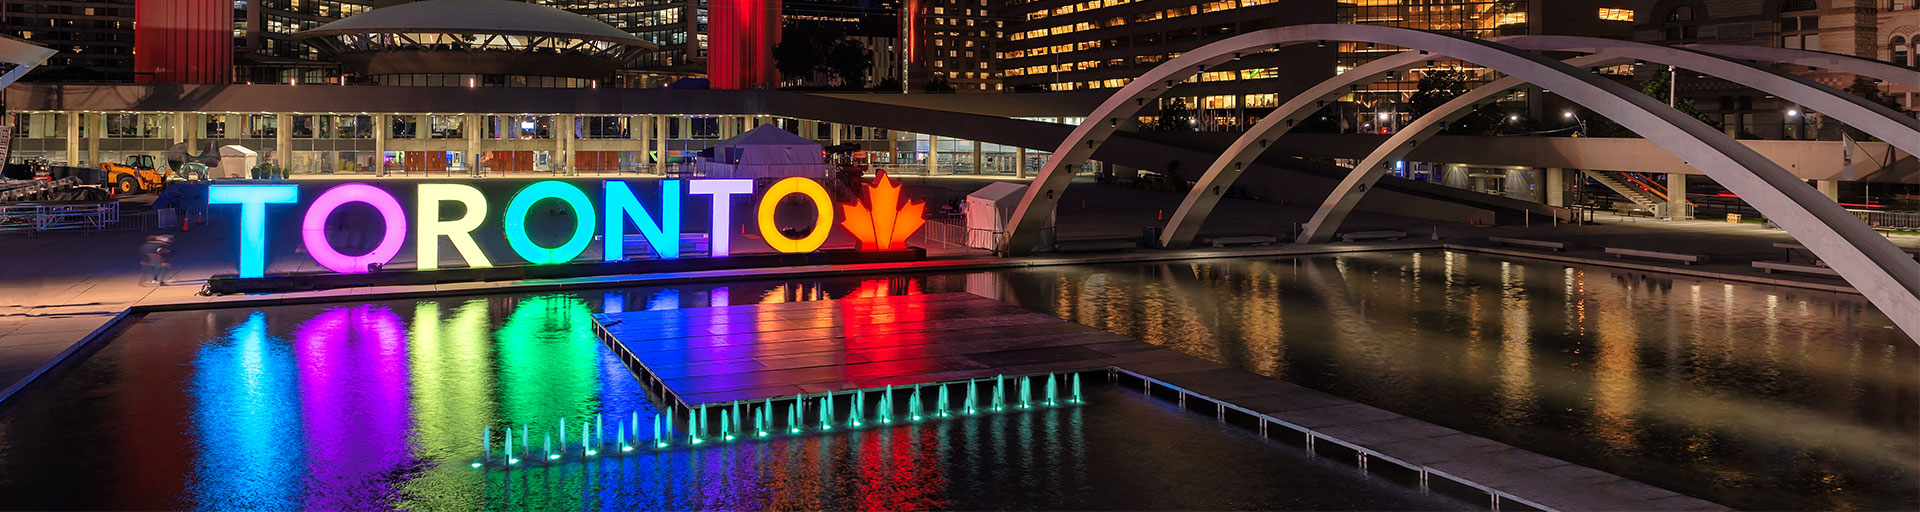 Nathan Phillips Square in Toronto at night